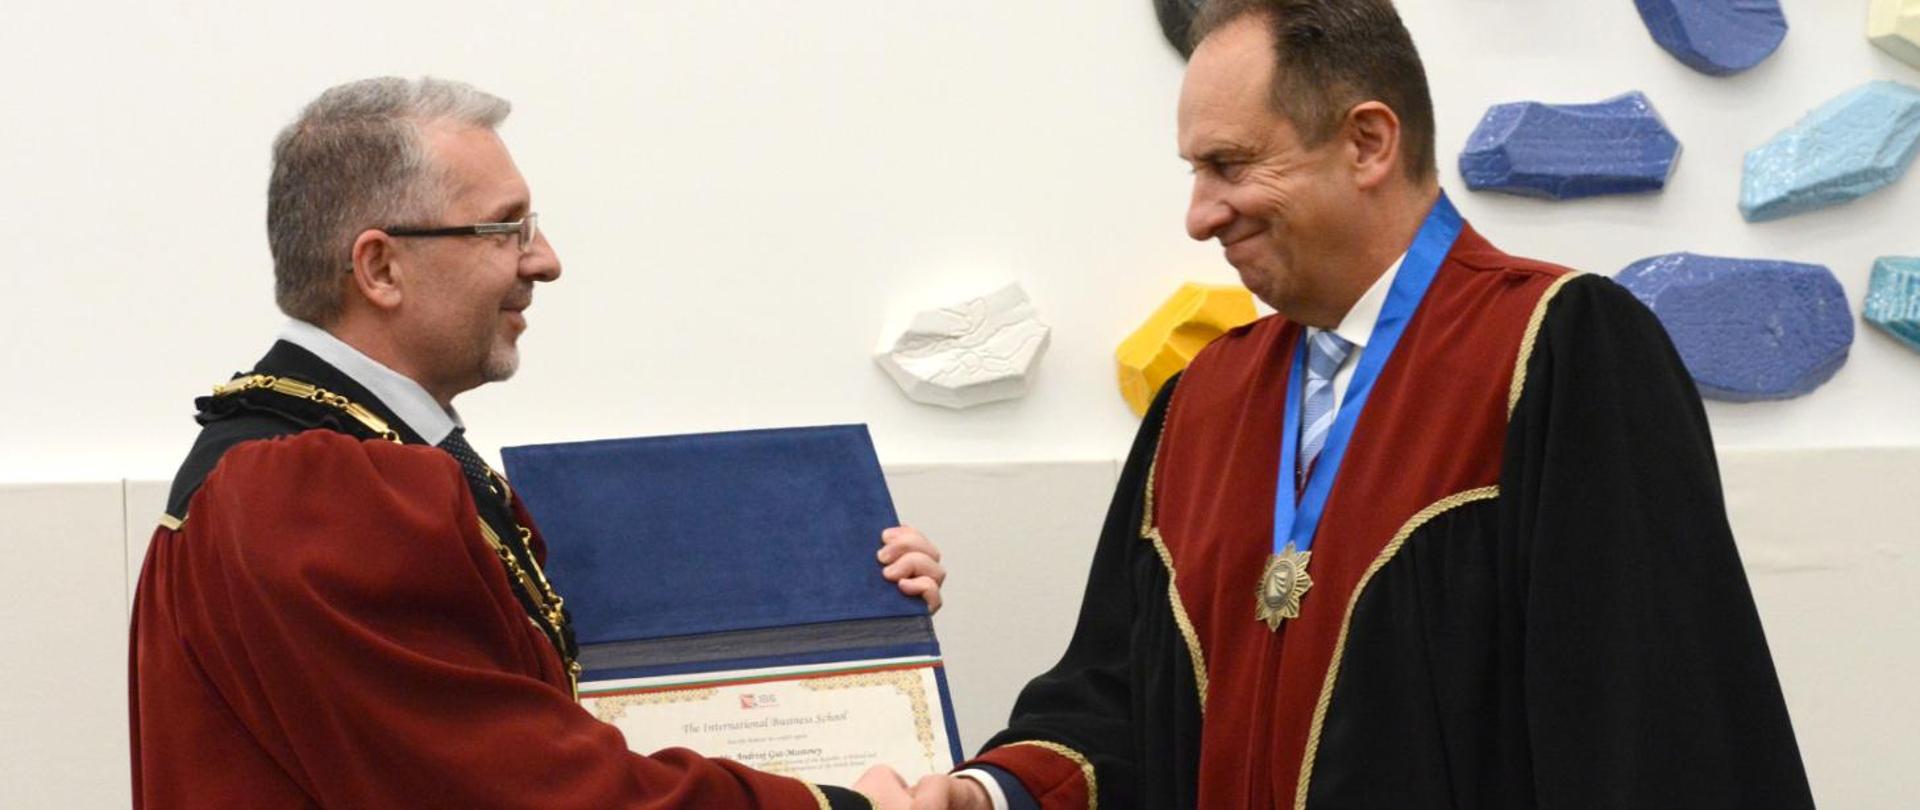 Two men in togas shaking hands. Andrzej Gut-Mostowy wearing a medal and receiving a diploma.